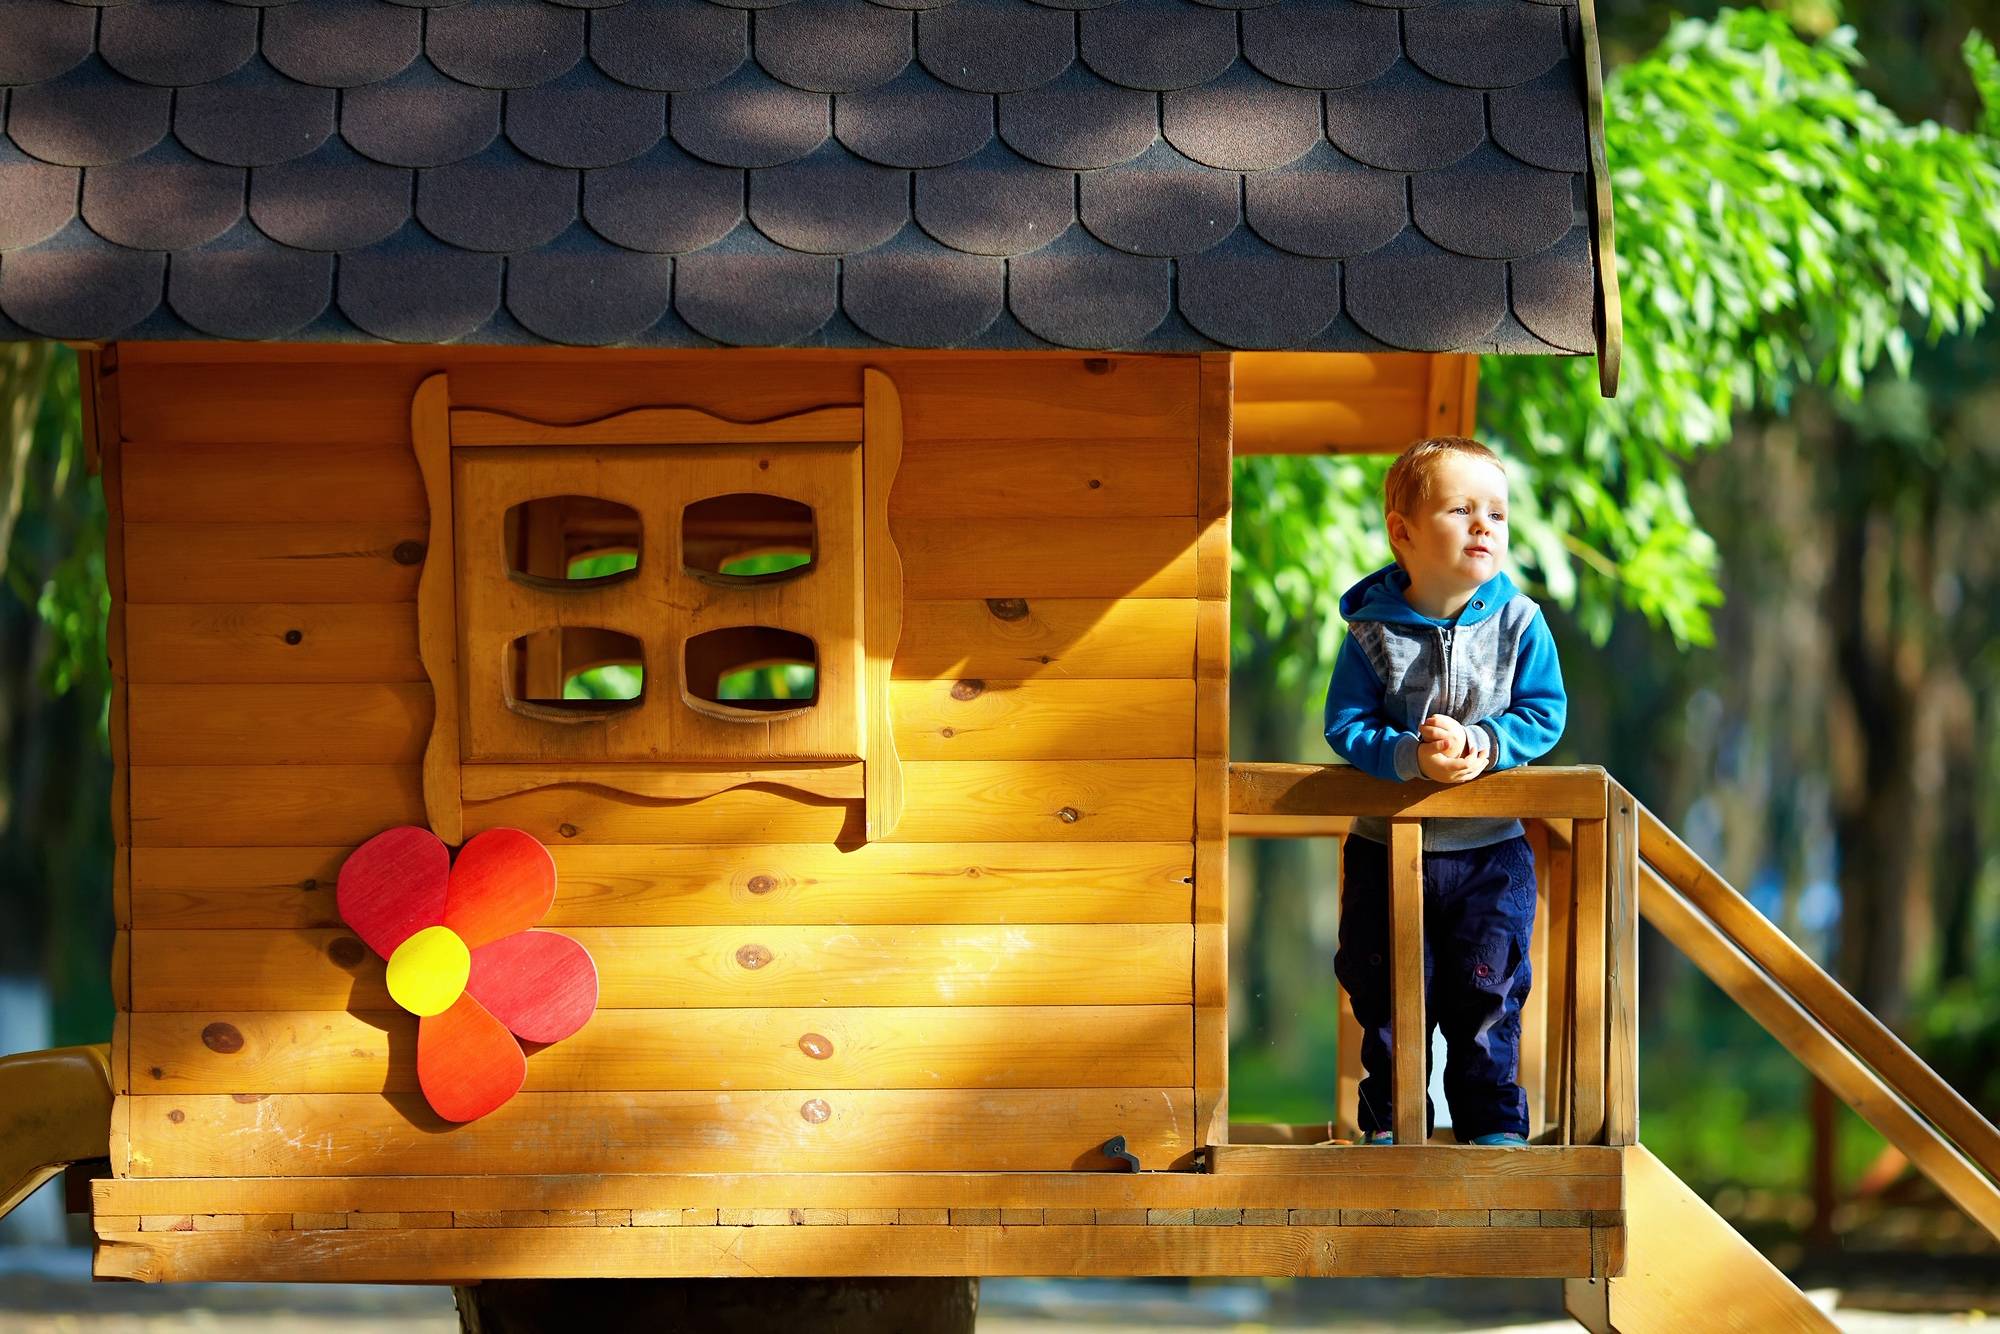 Important Things to Consider When Installing a Kid’s Cubby House